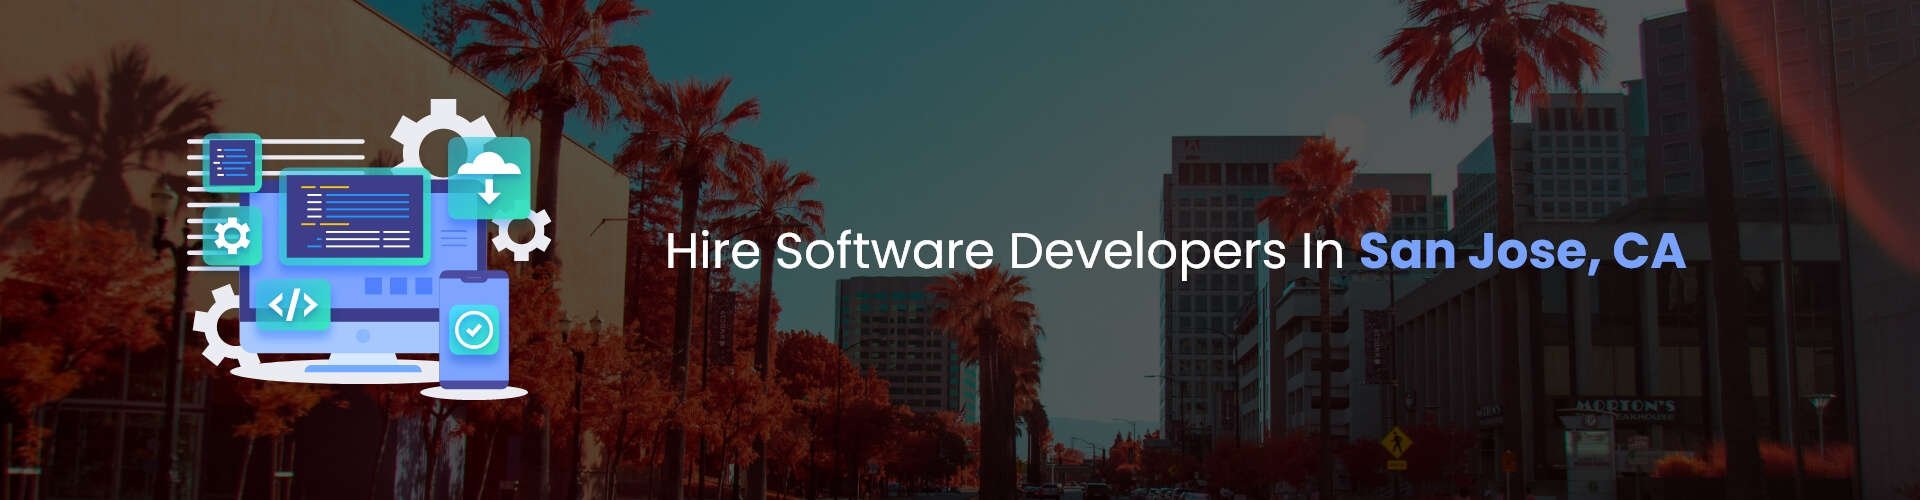 hire software developers in san jose